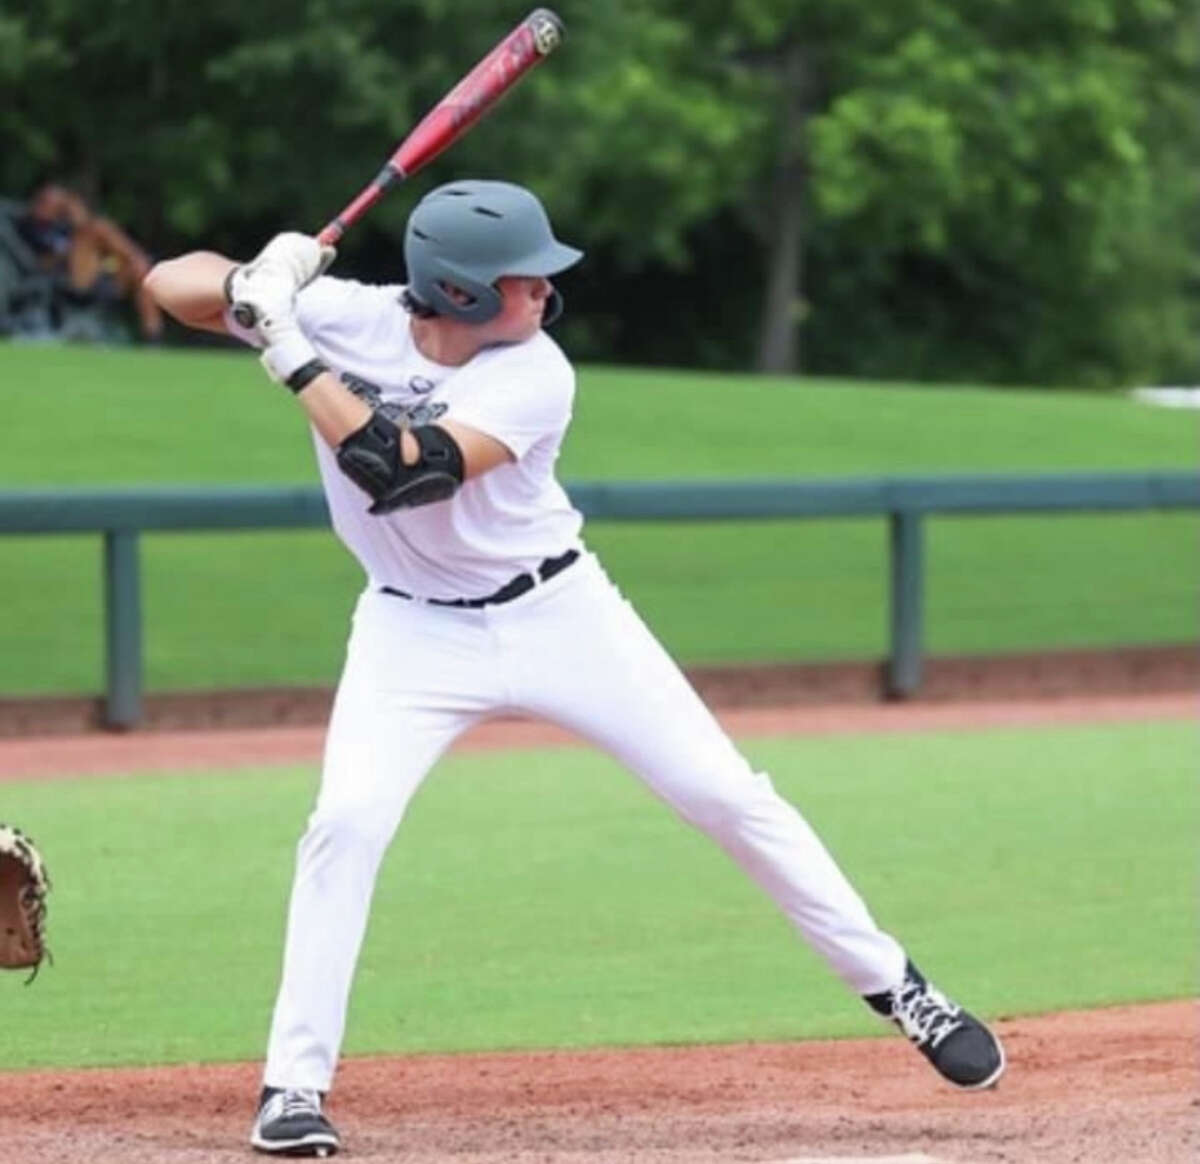 CT native, UConn baseball commit Charboneau to play at Hamden Hall